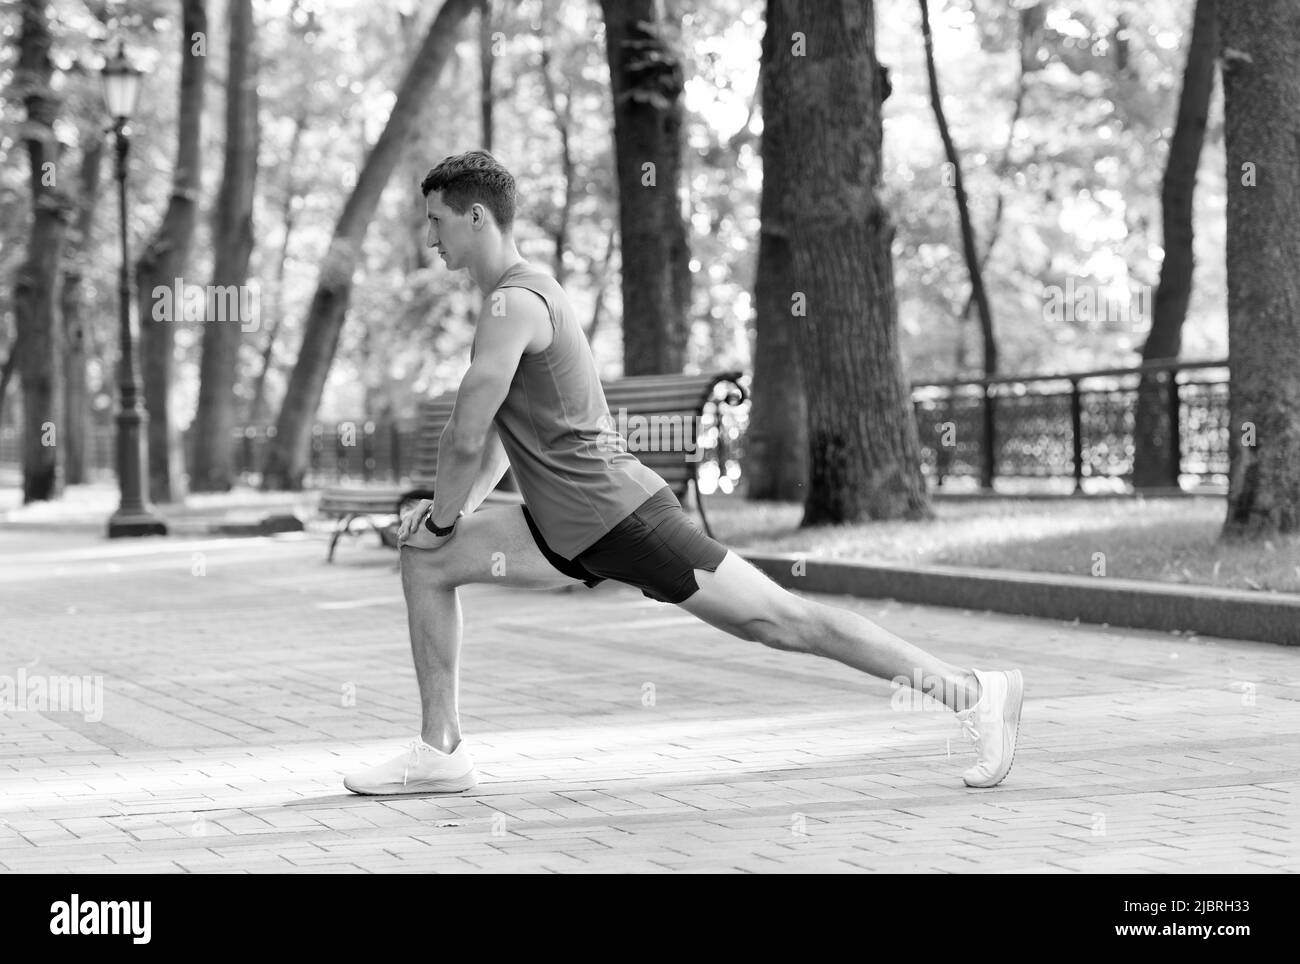 Lunge position Black and White Stock Photos & Images - Alamy